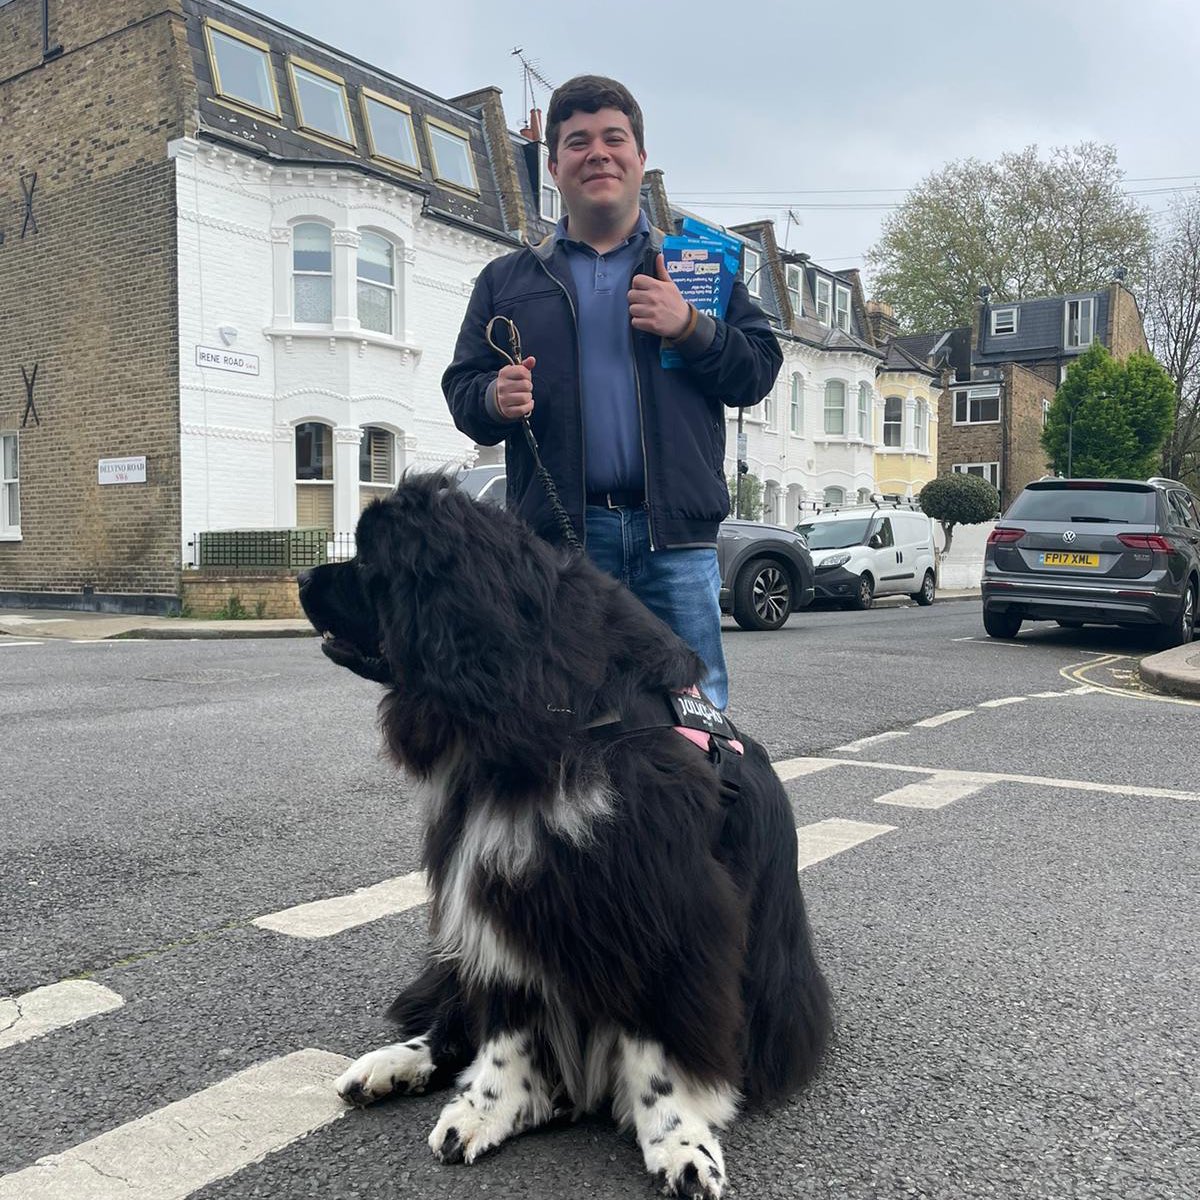 🗳️ Fantastic day GOTV for @Councillorsuzie & @Tony_Devenish, while meeting the largest dog in Parsons Green.